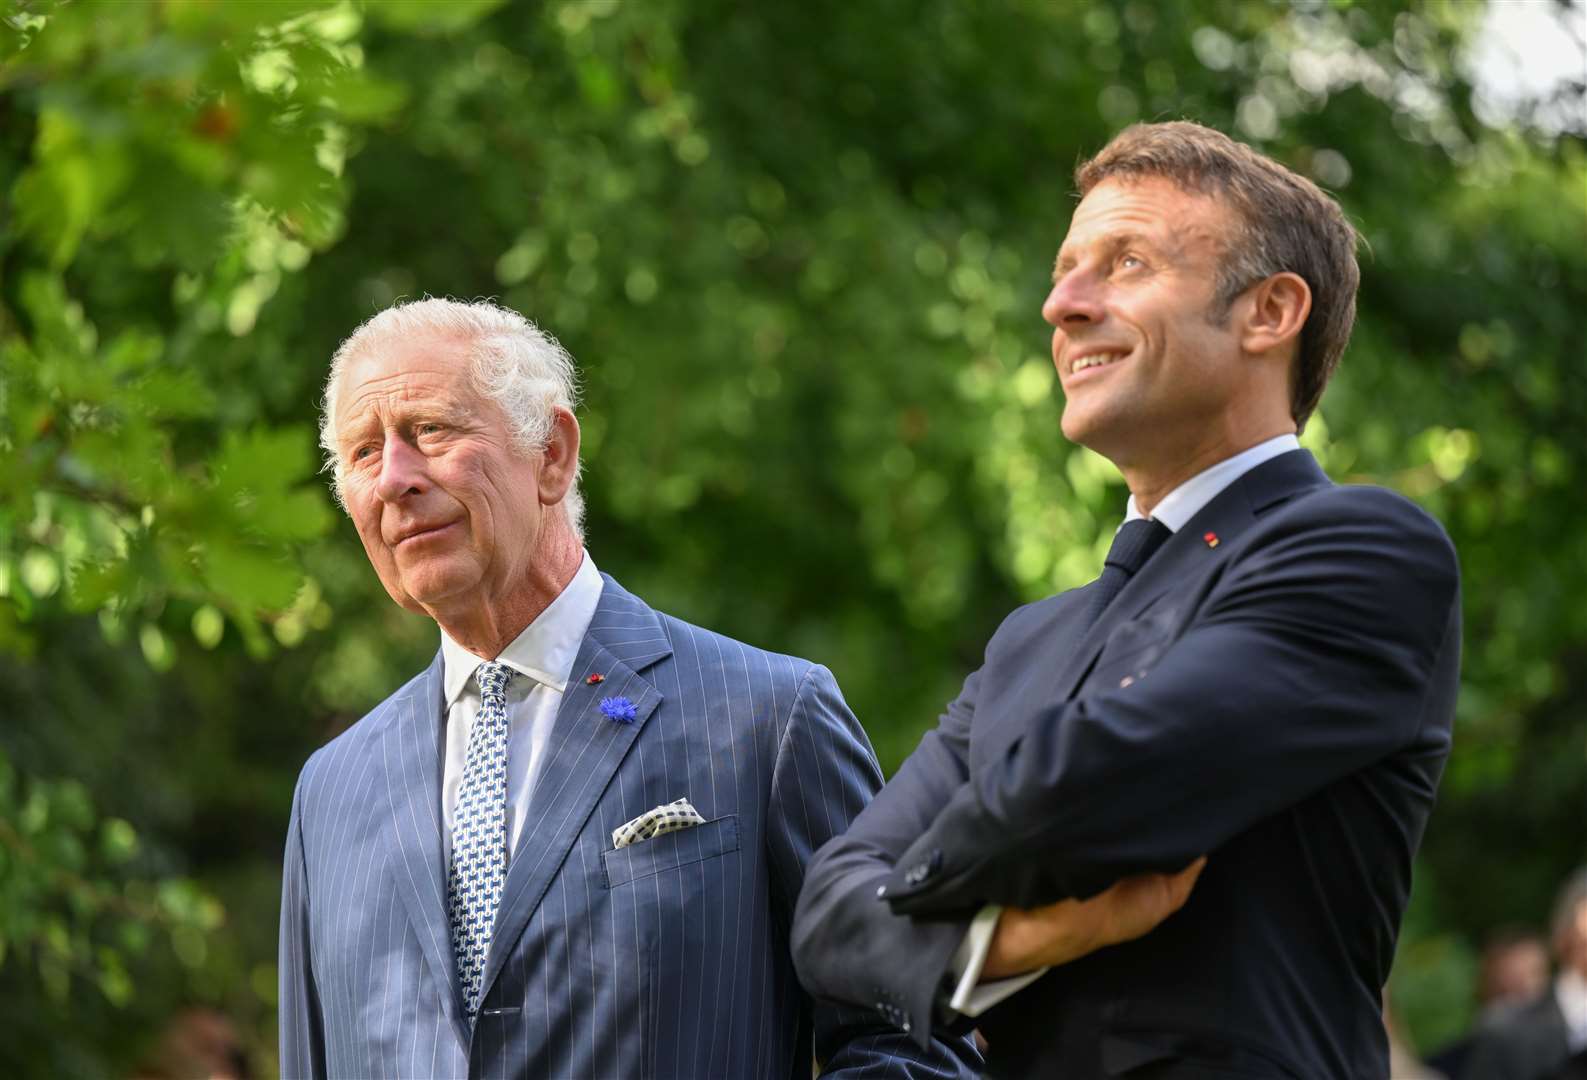 The King and Emmanuel Macron planted a tree in the garden of the British ambassador’s residence in Paris to commemorate the state visit (Samir Hussein/PA)